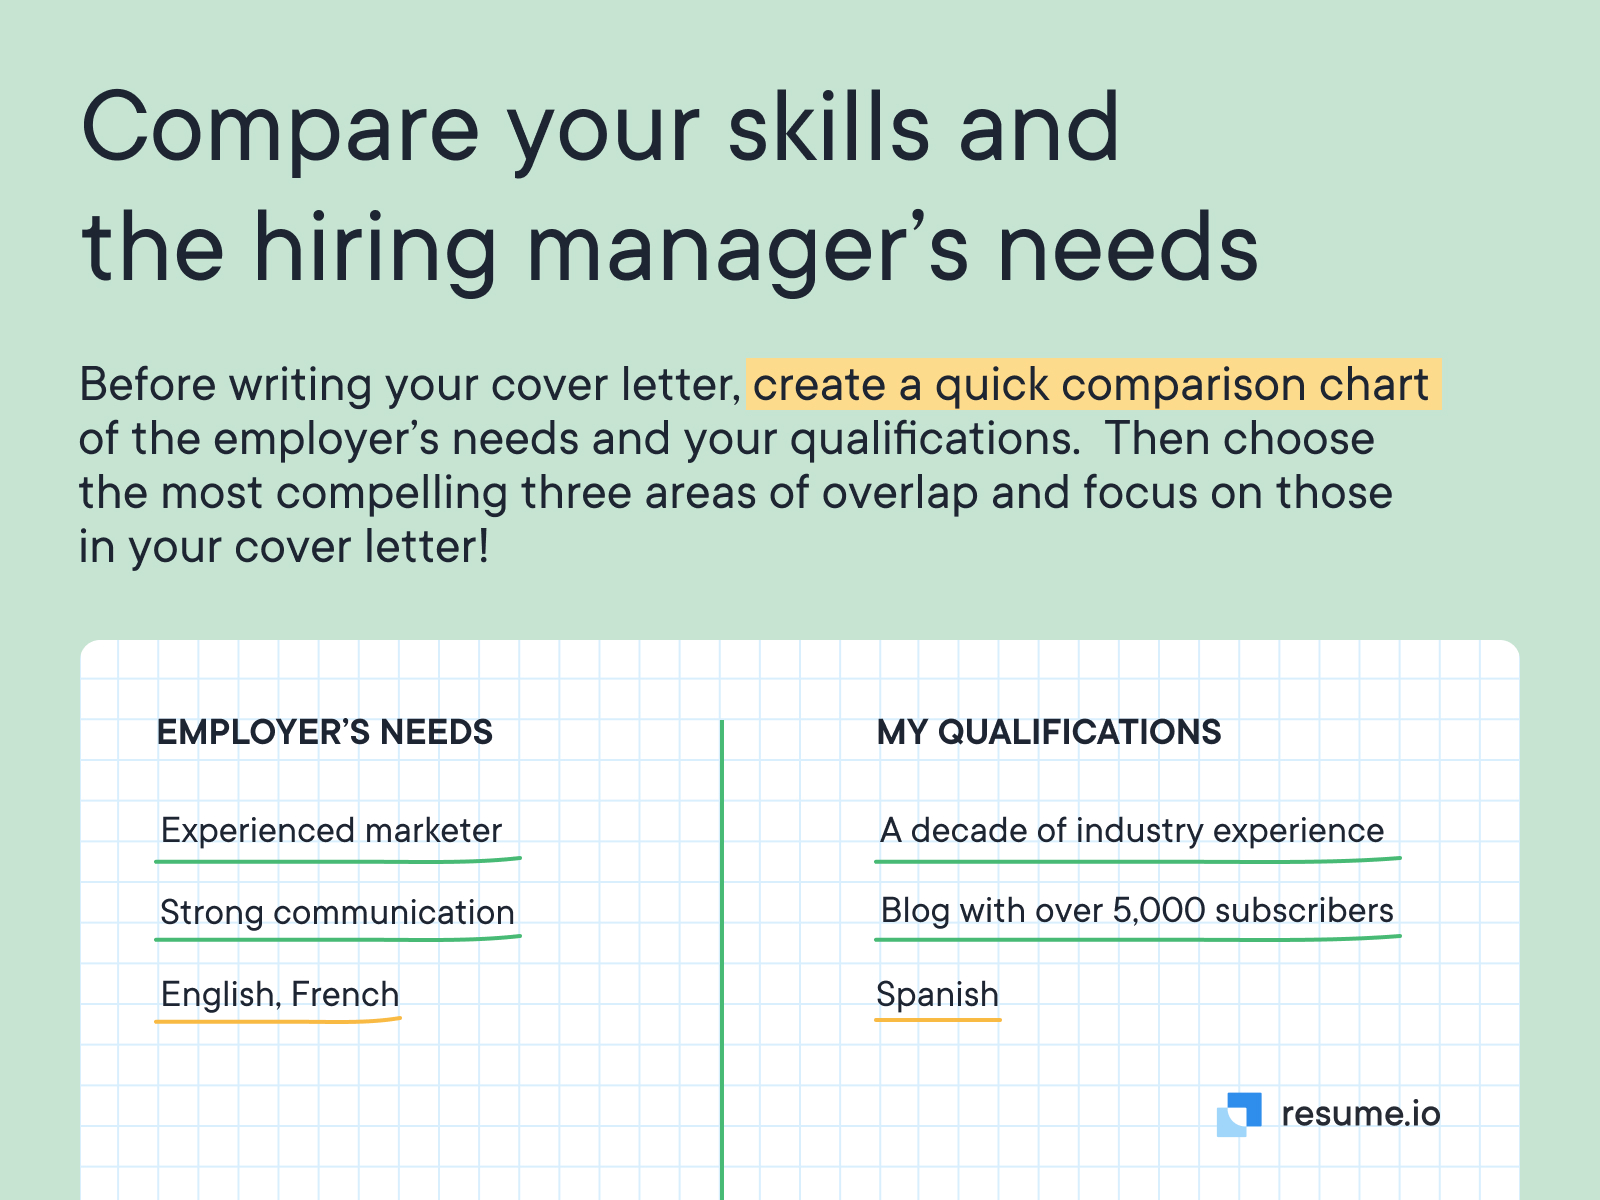 Compare your skills and the hiring manager's needs